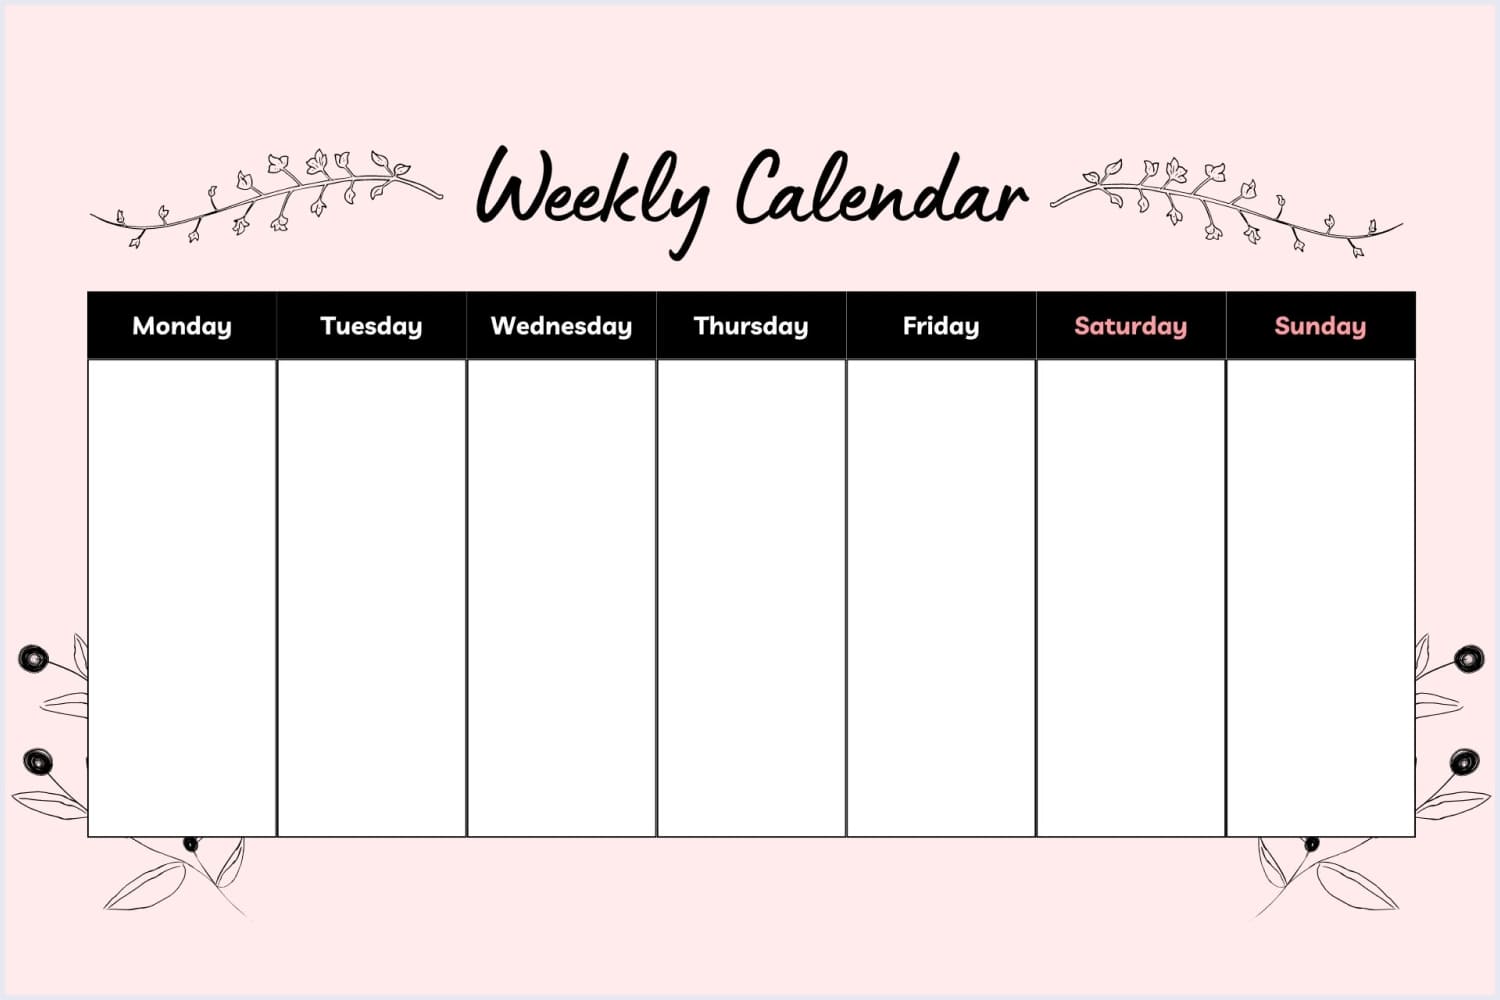 Weekly calendar with black title and white background.